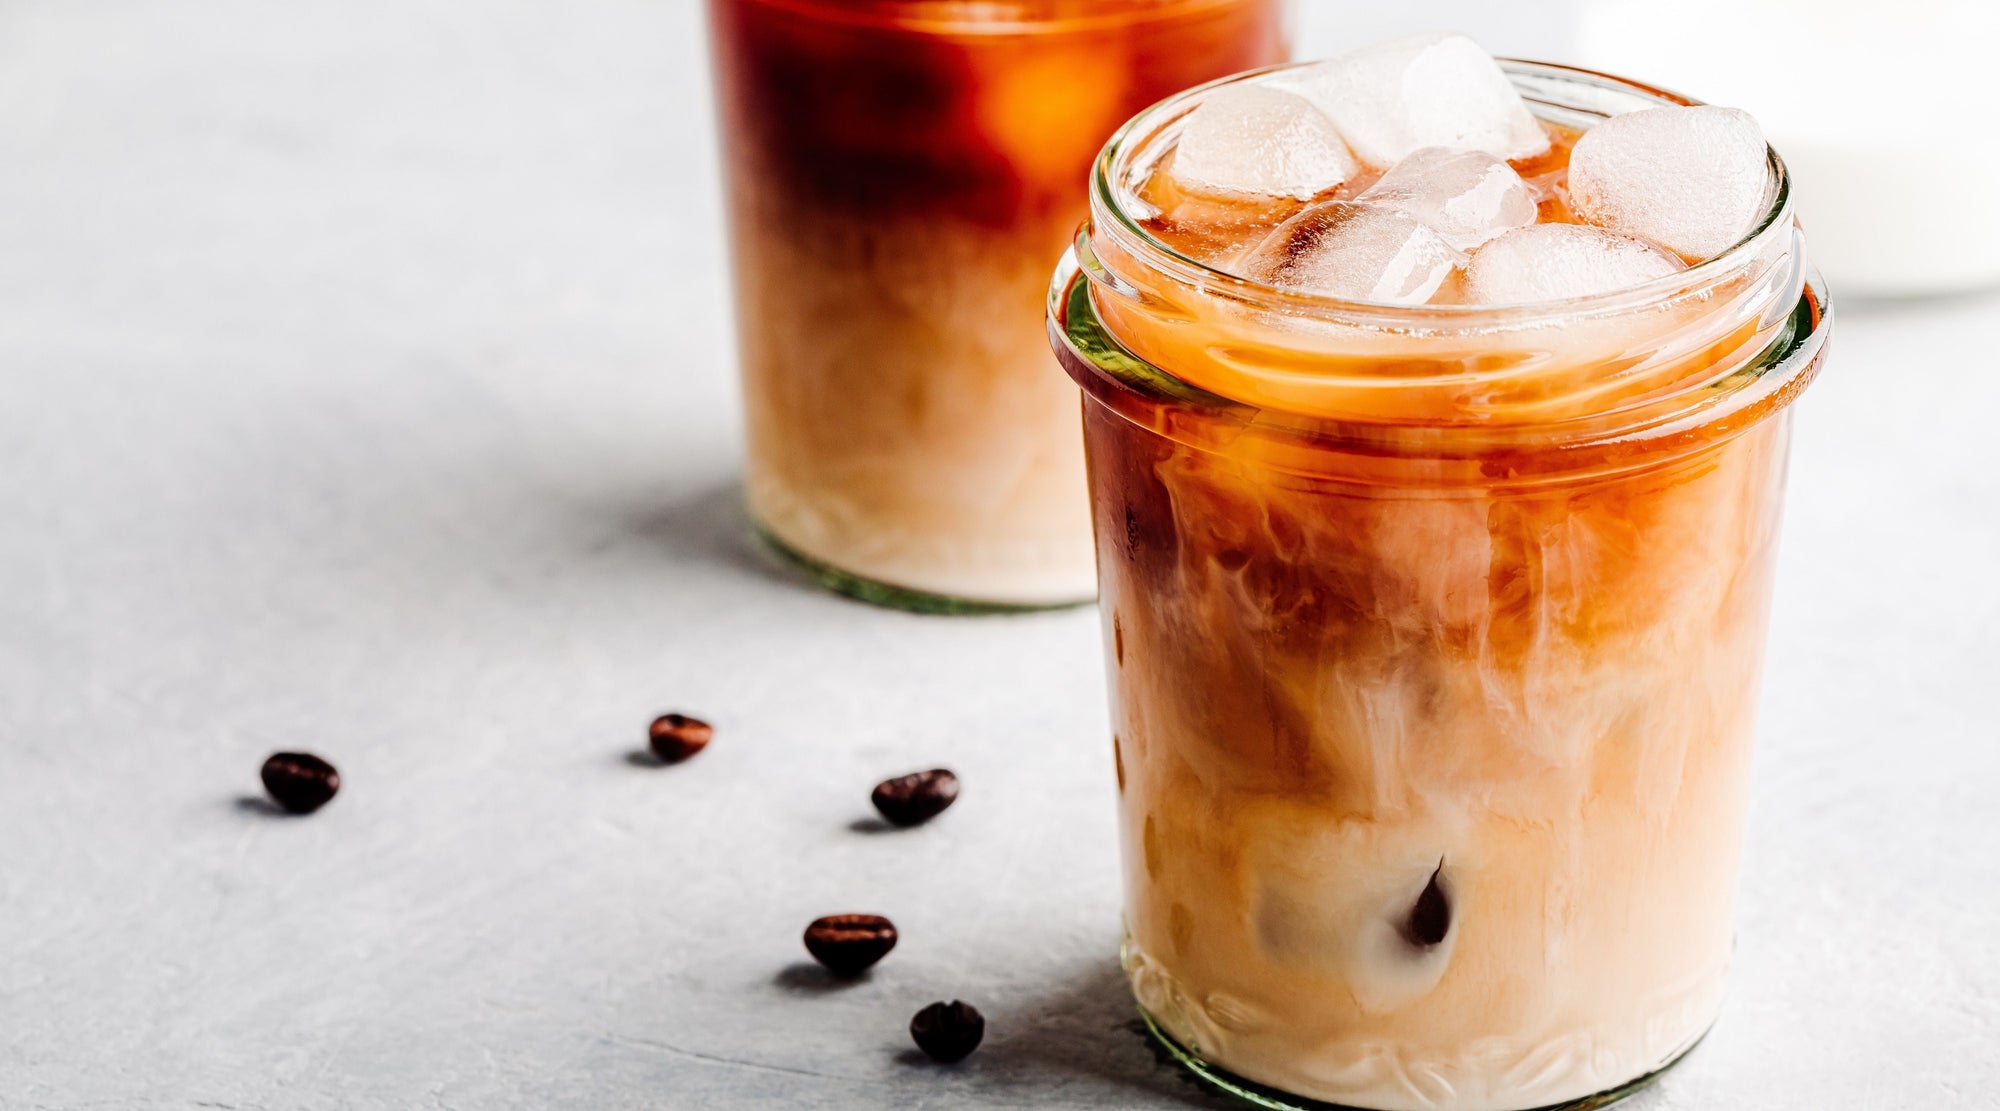 Are you doing cold brew right?